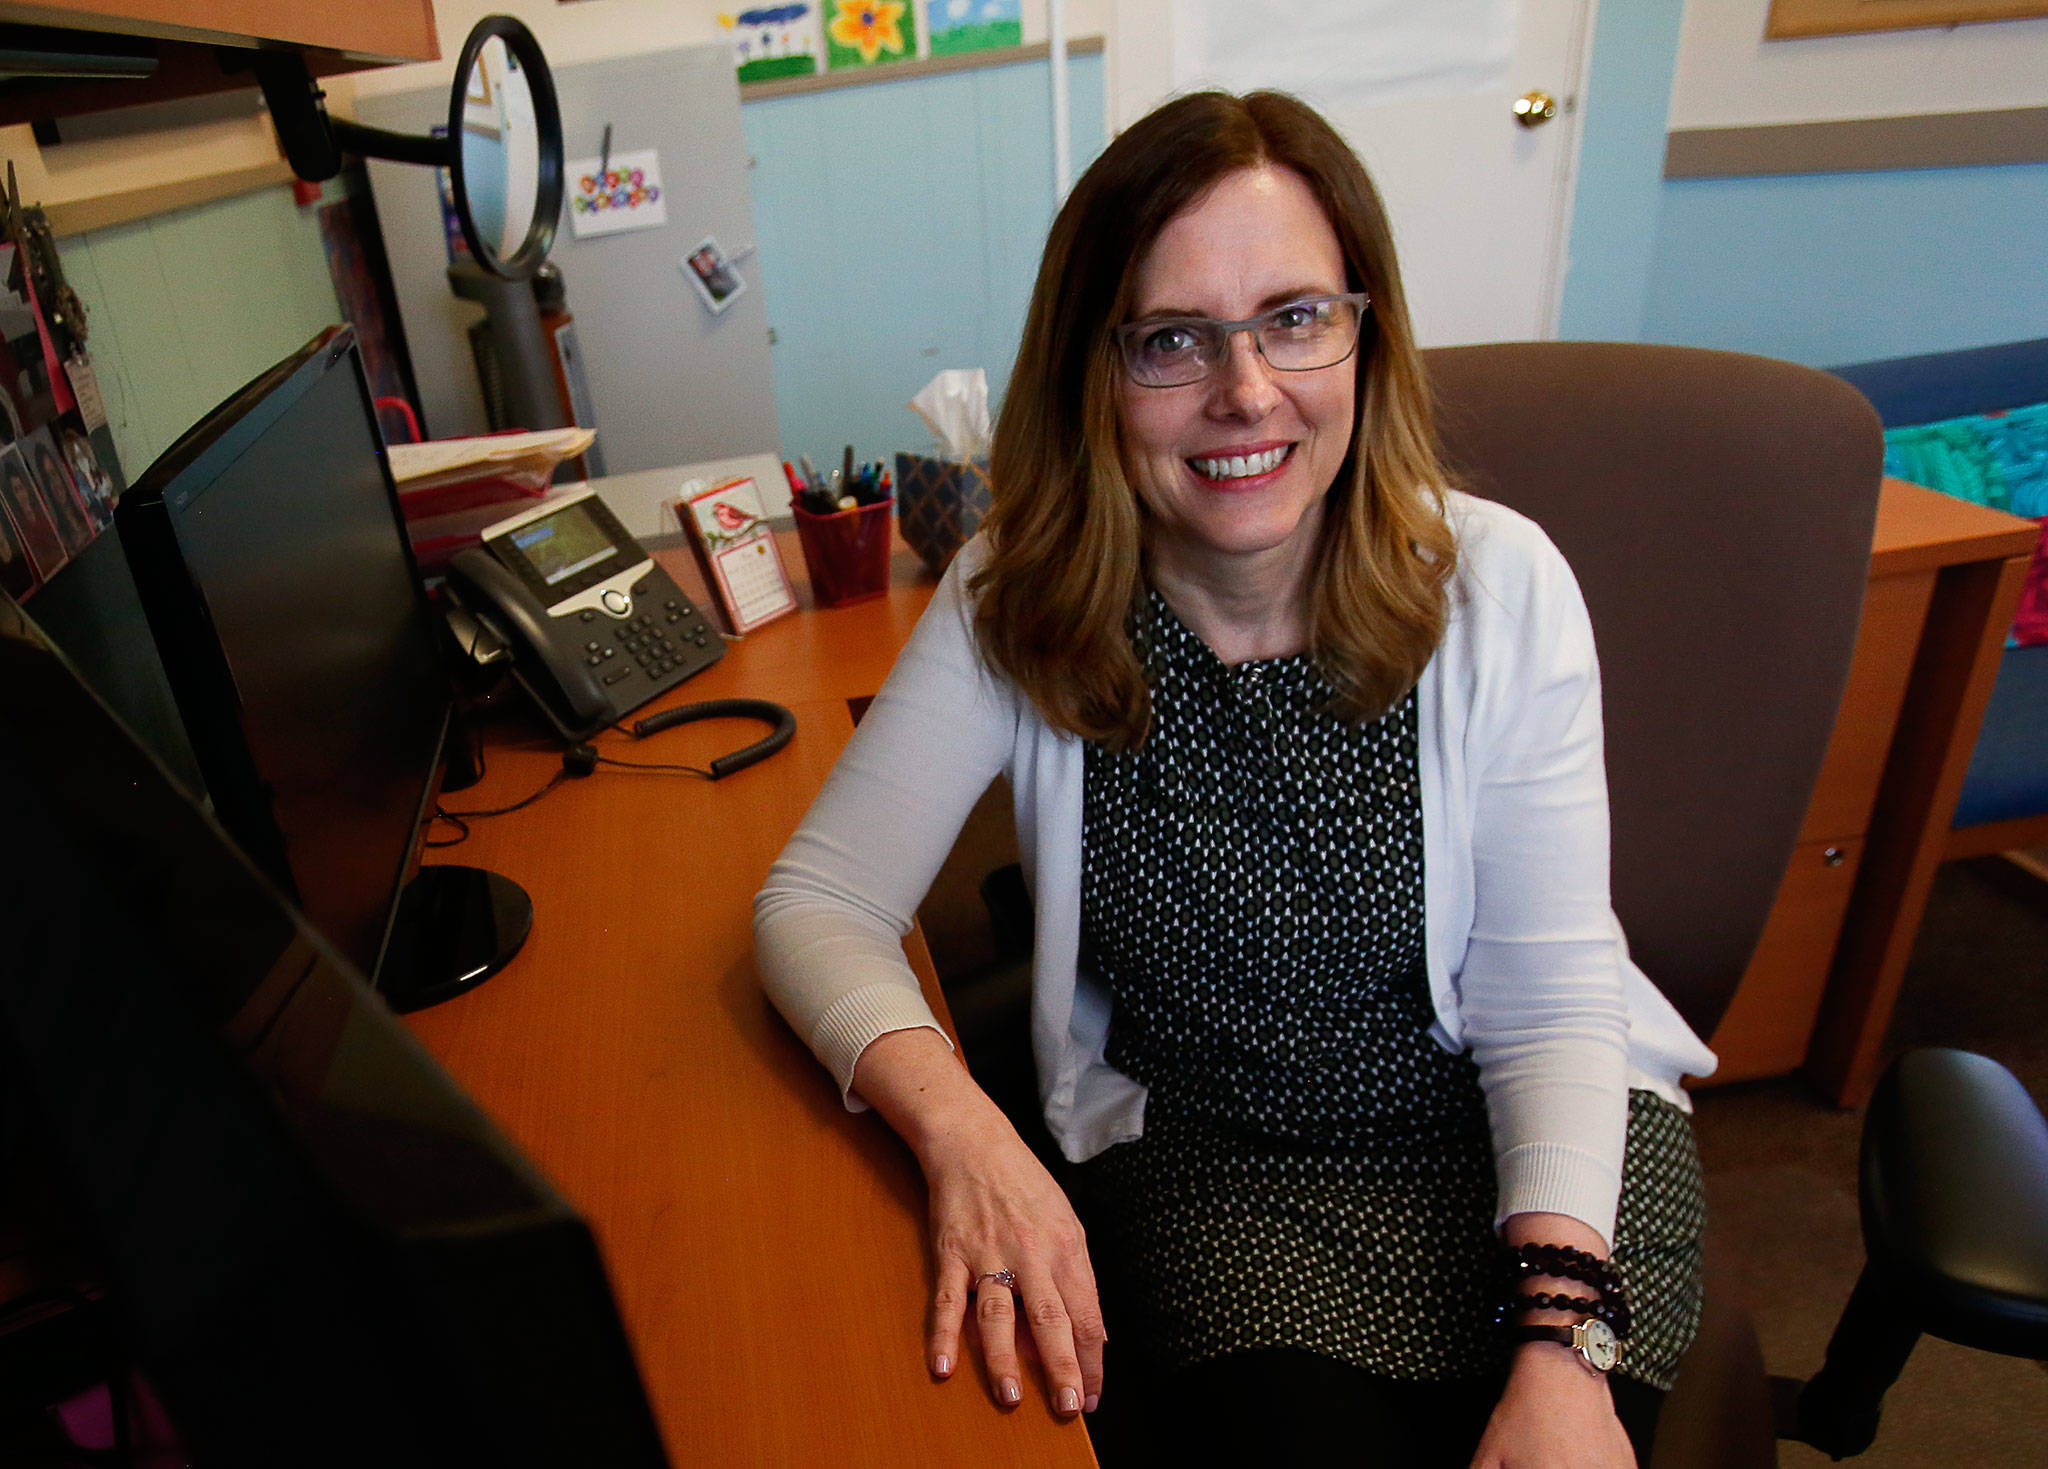 Diana Beal, with Compass Health, trains others to help young people in mental health crises. (Dan Bates / The Herald)